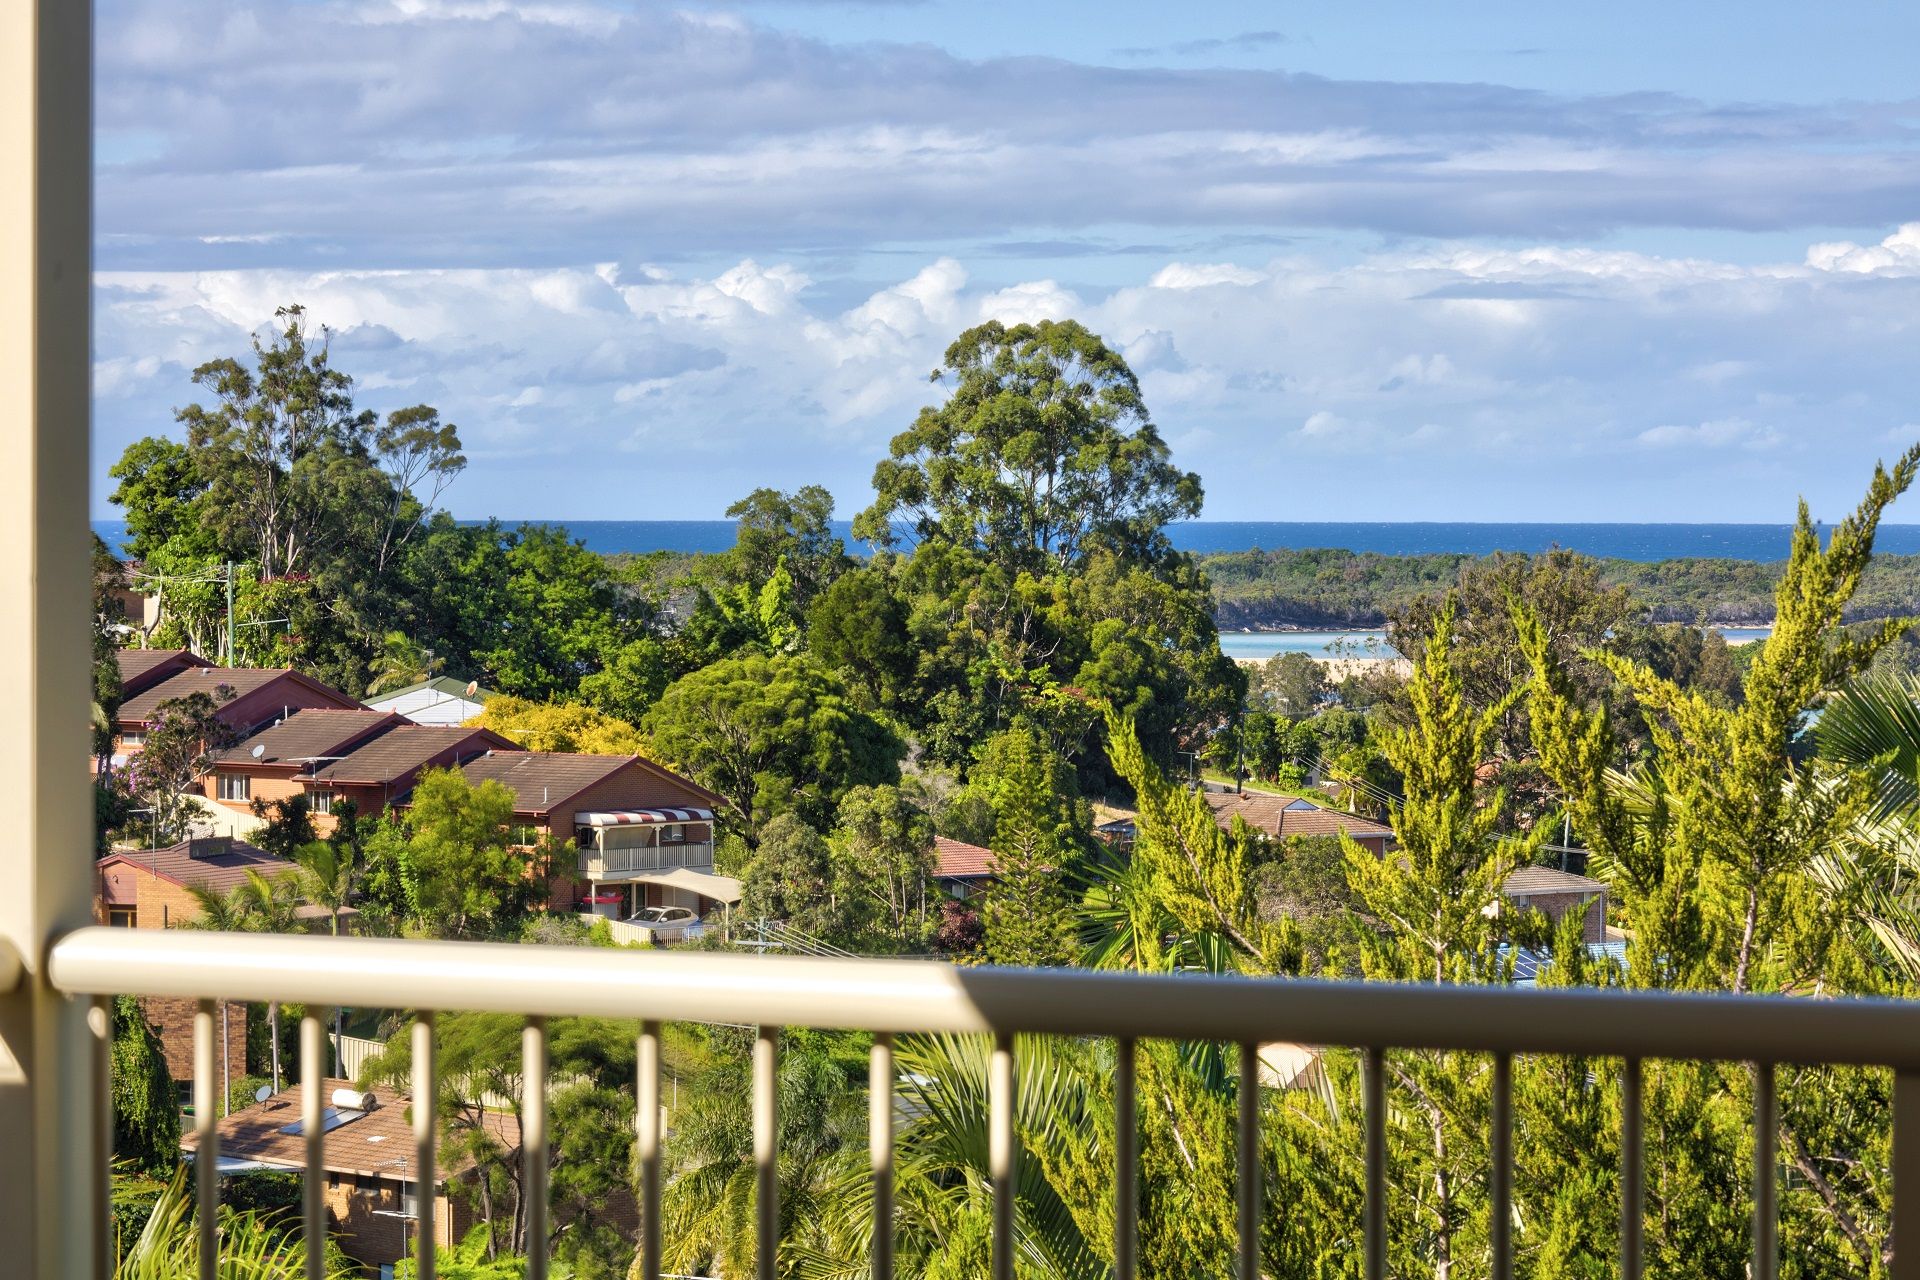 Nambucca Heads Real Estate: Family Home with Water Views